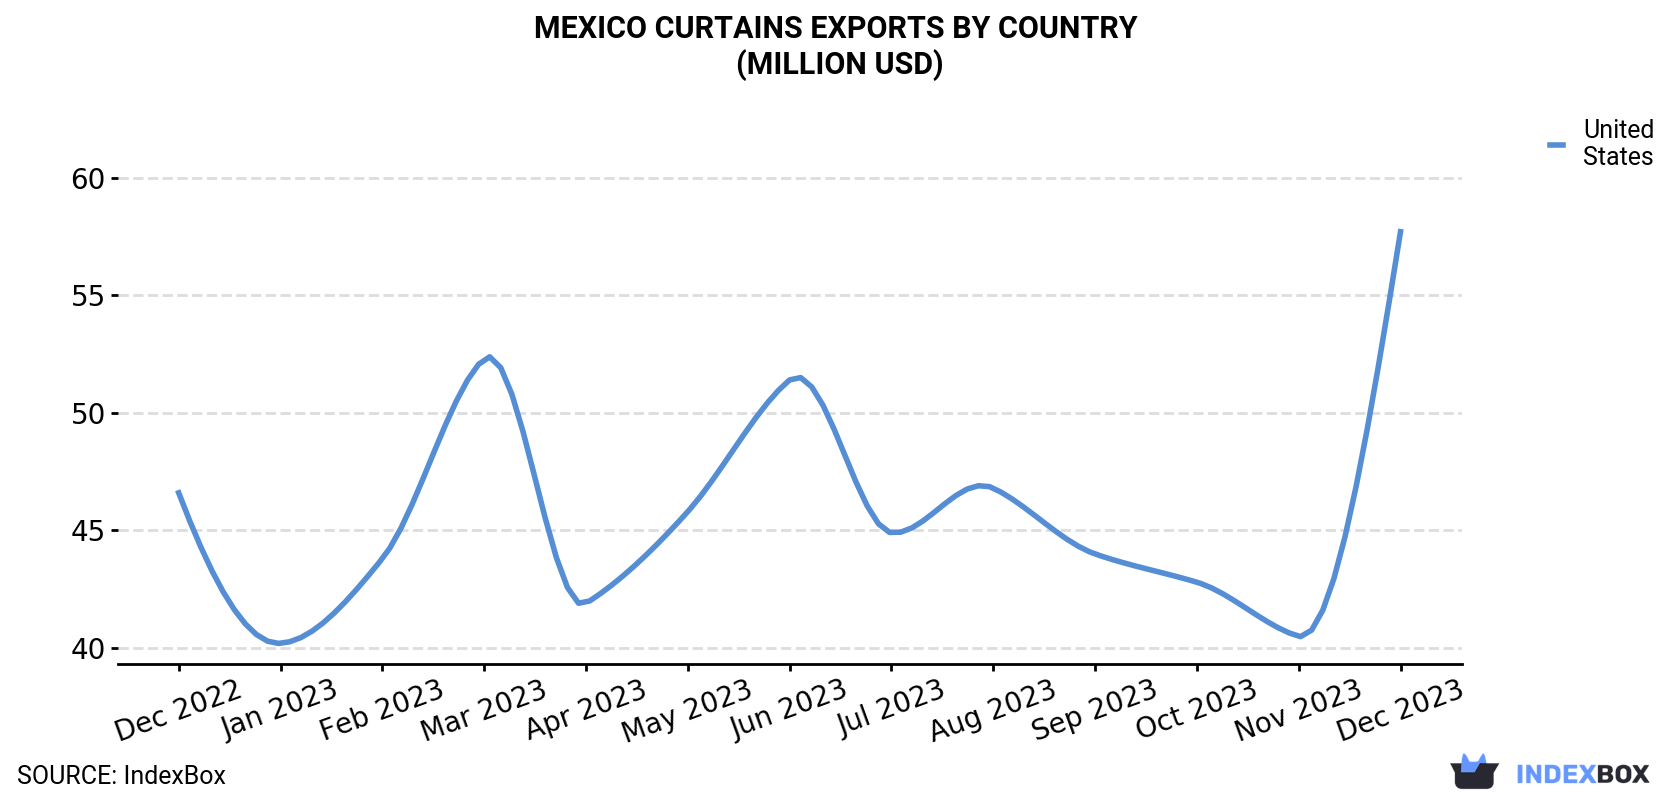 Mexico Curtains Exports By Country (Million USD)